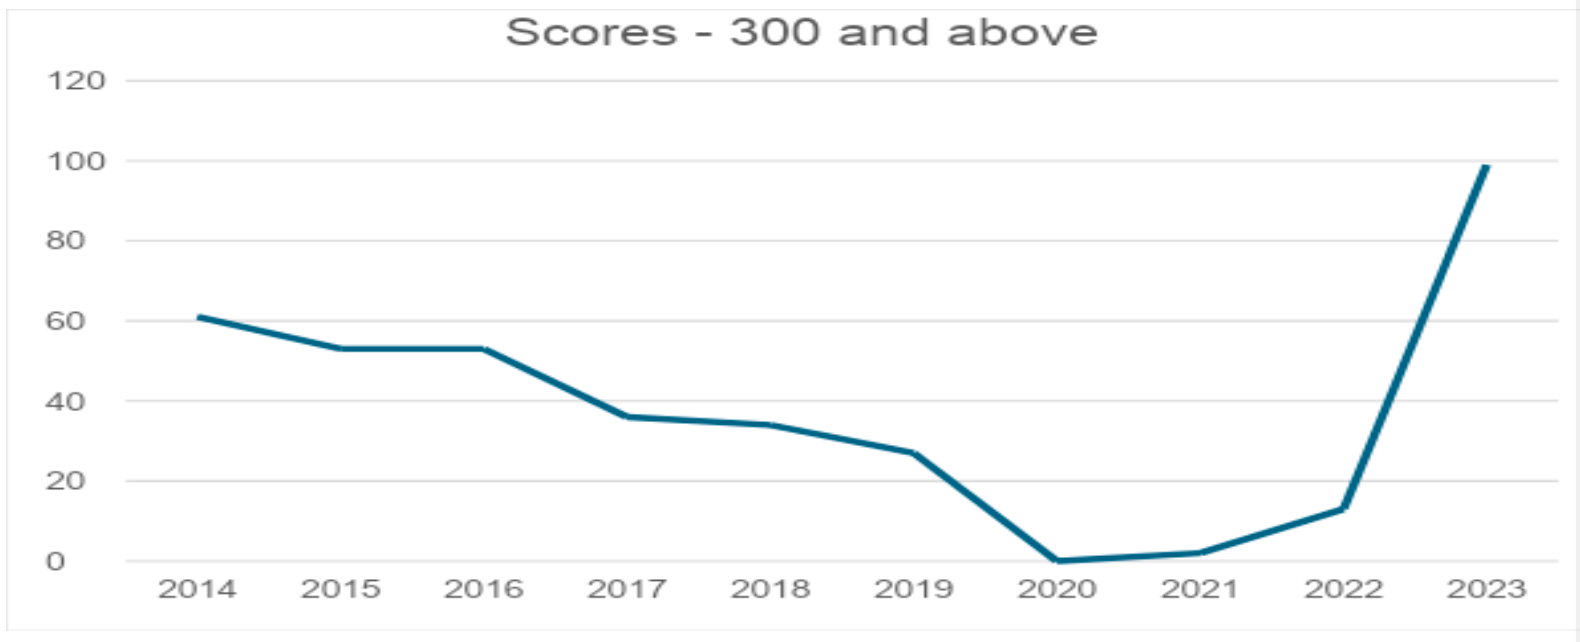 Scores - 300 and above